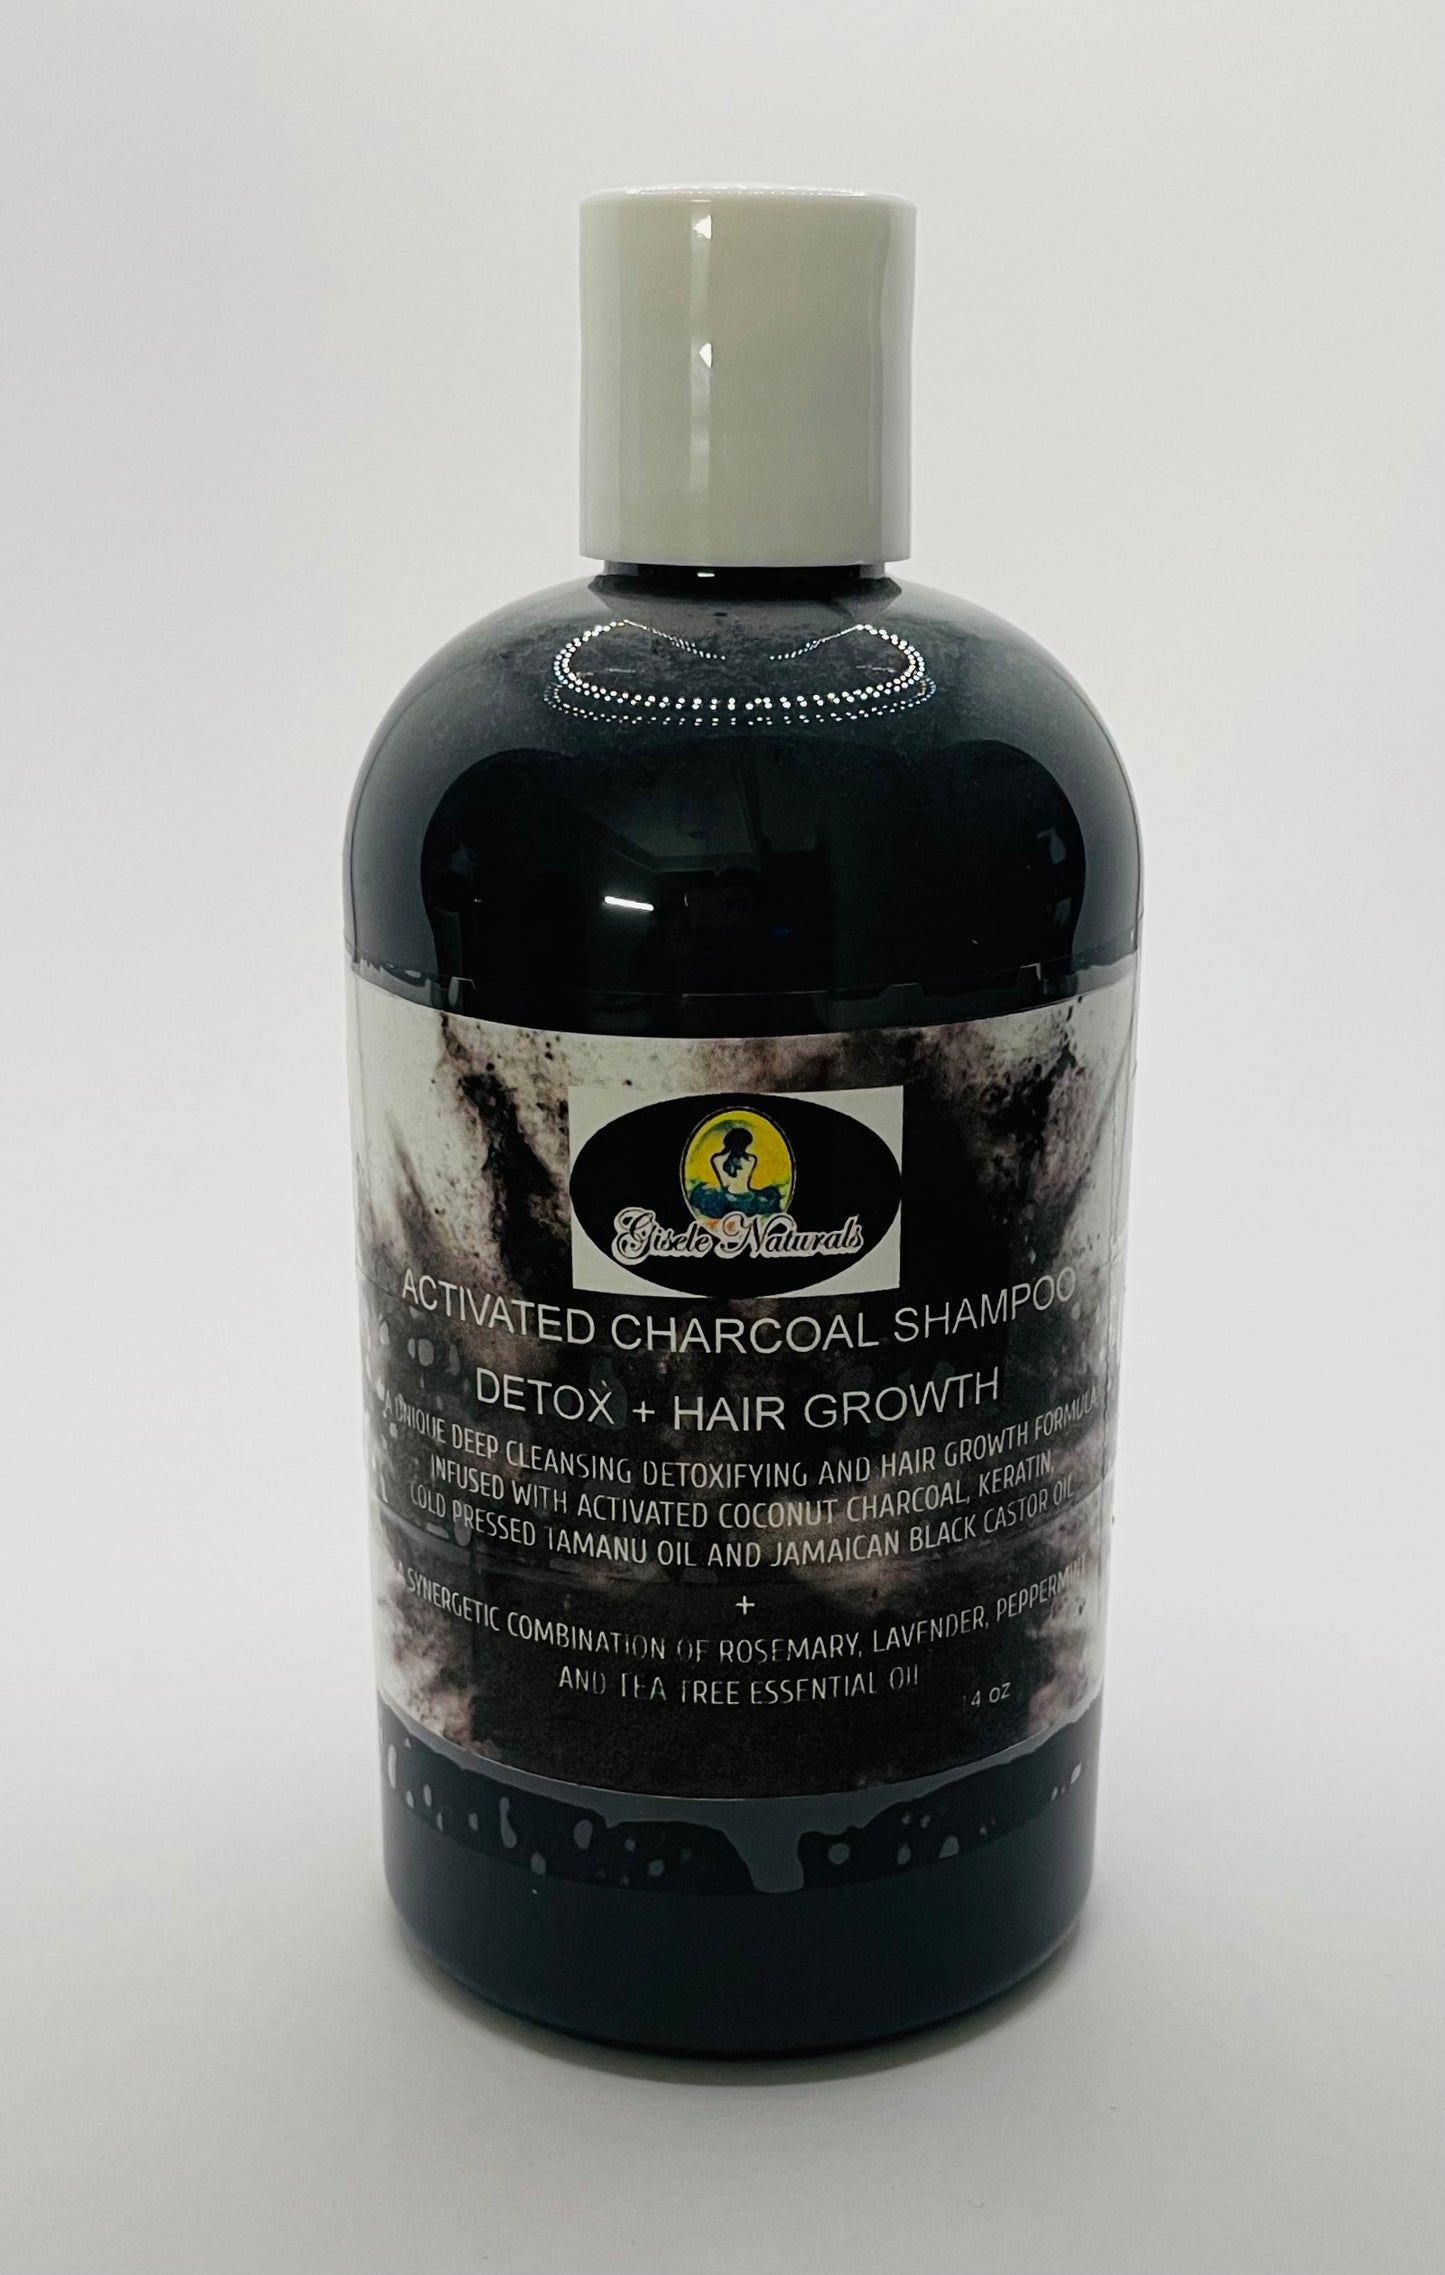 Activated charcoal shampoo